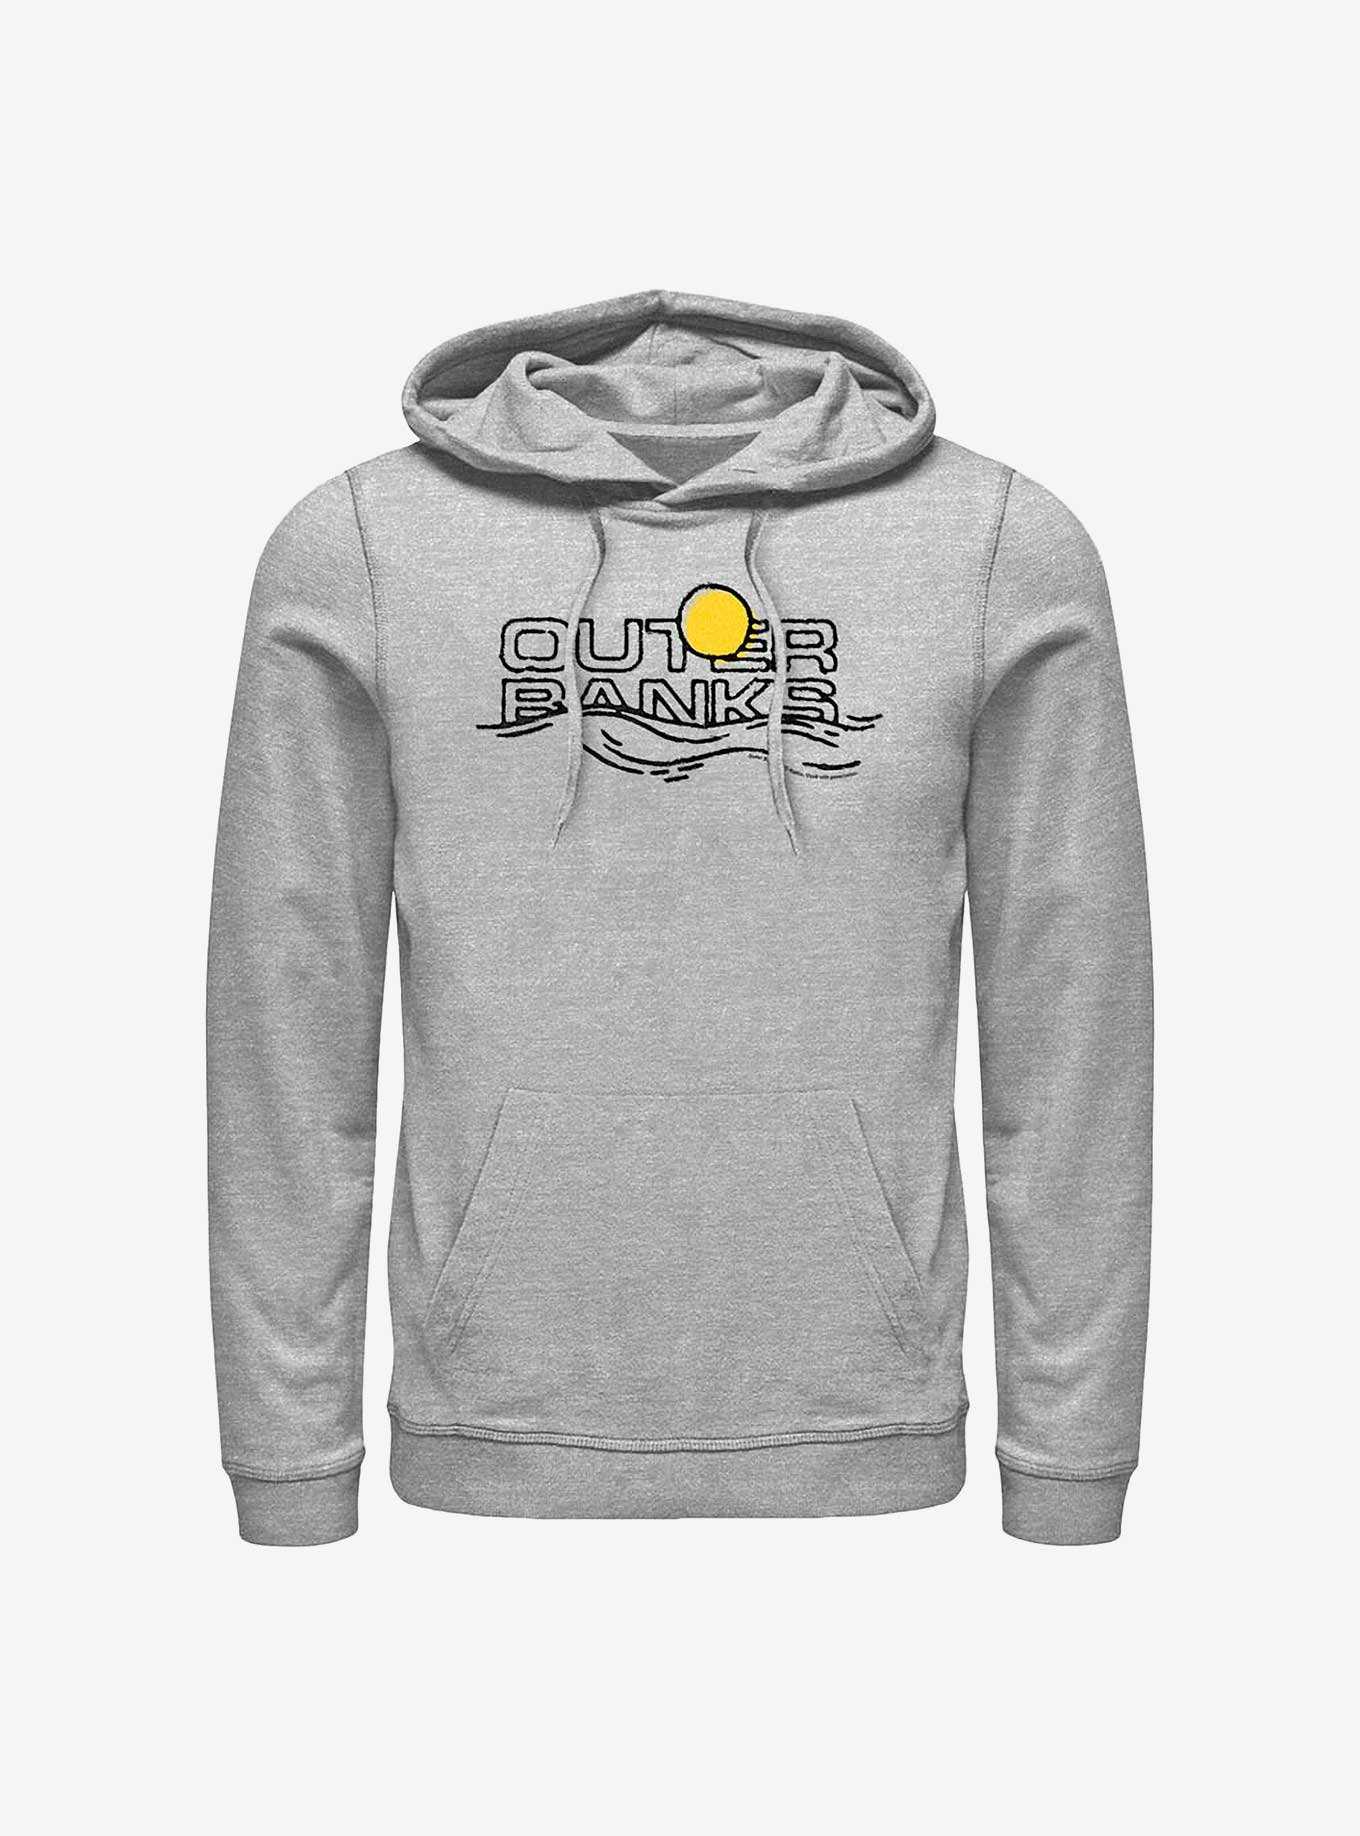 Outer Banks On Horizon Hoodie, , hi-res